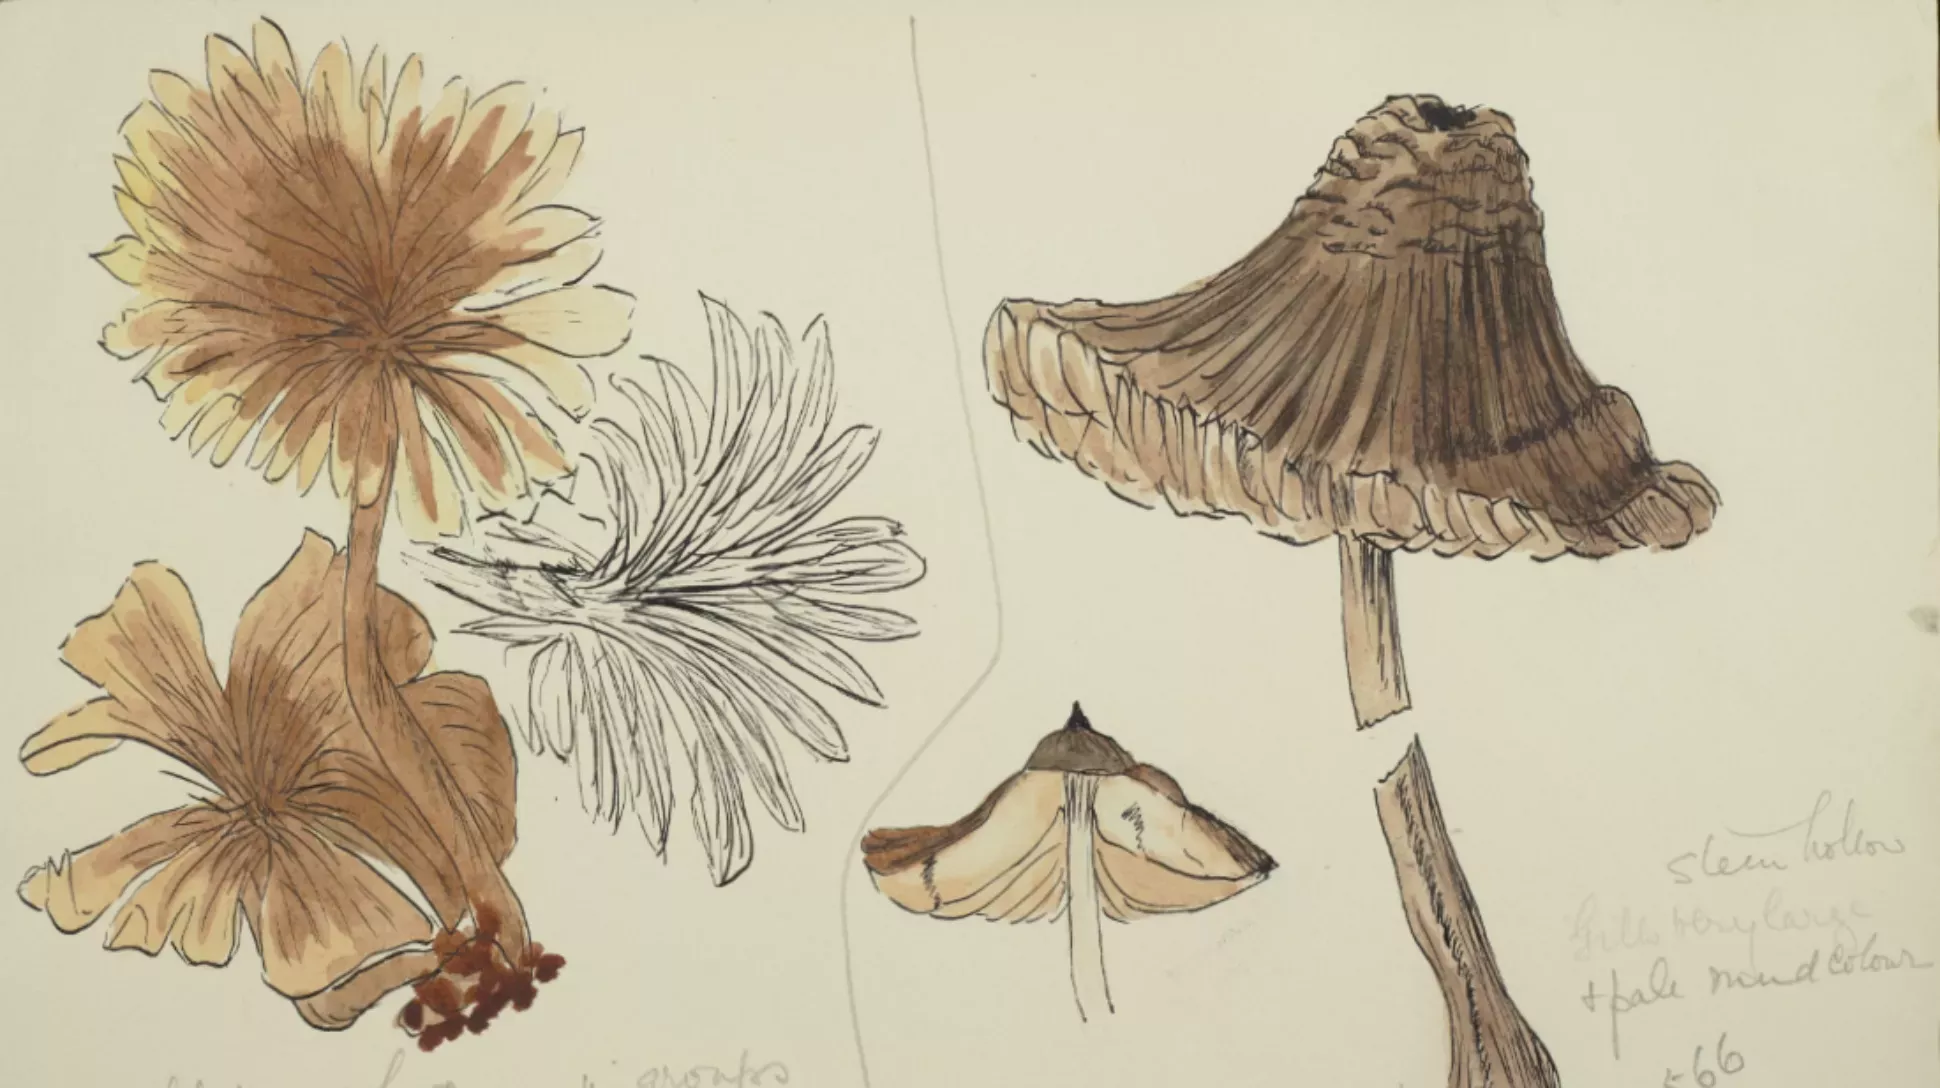 A sketch of a flower and a mushroom in watercolour